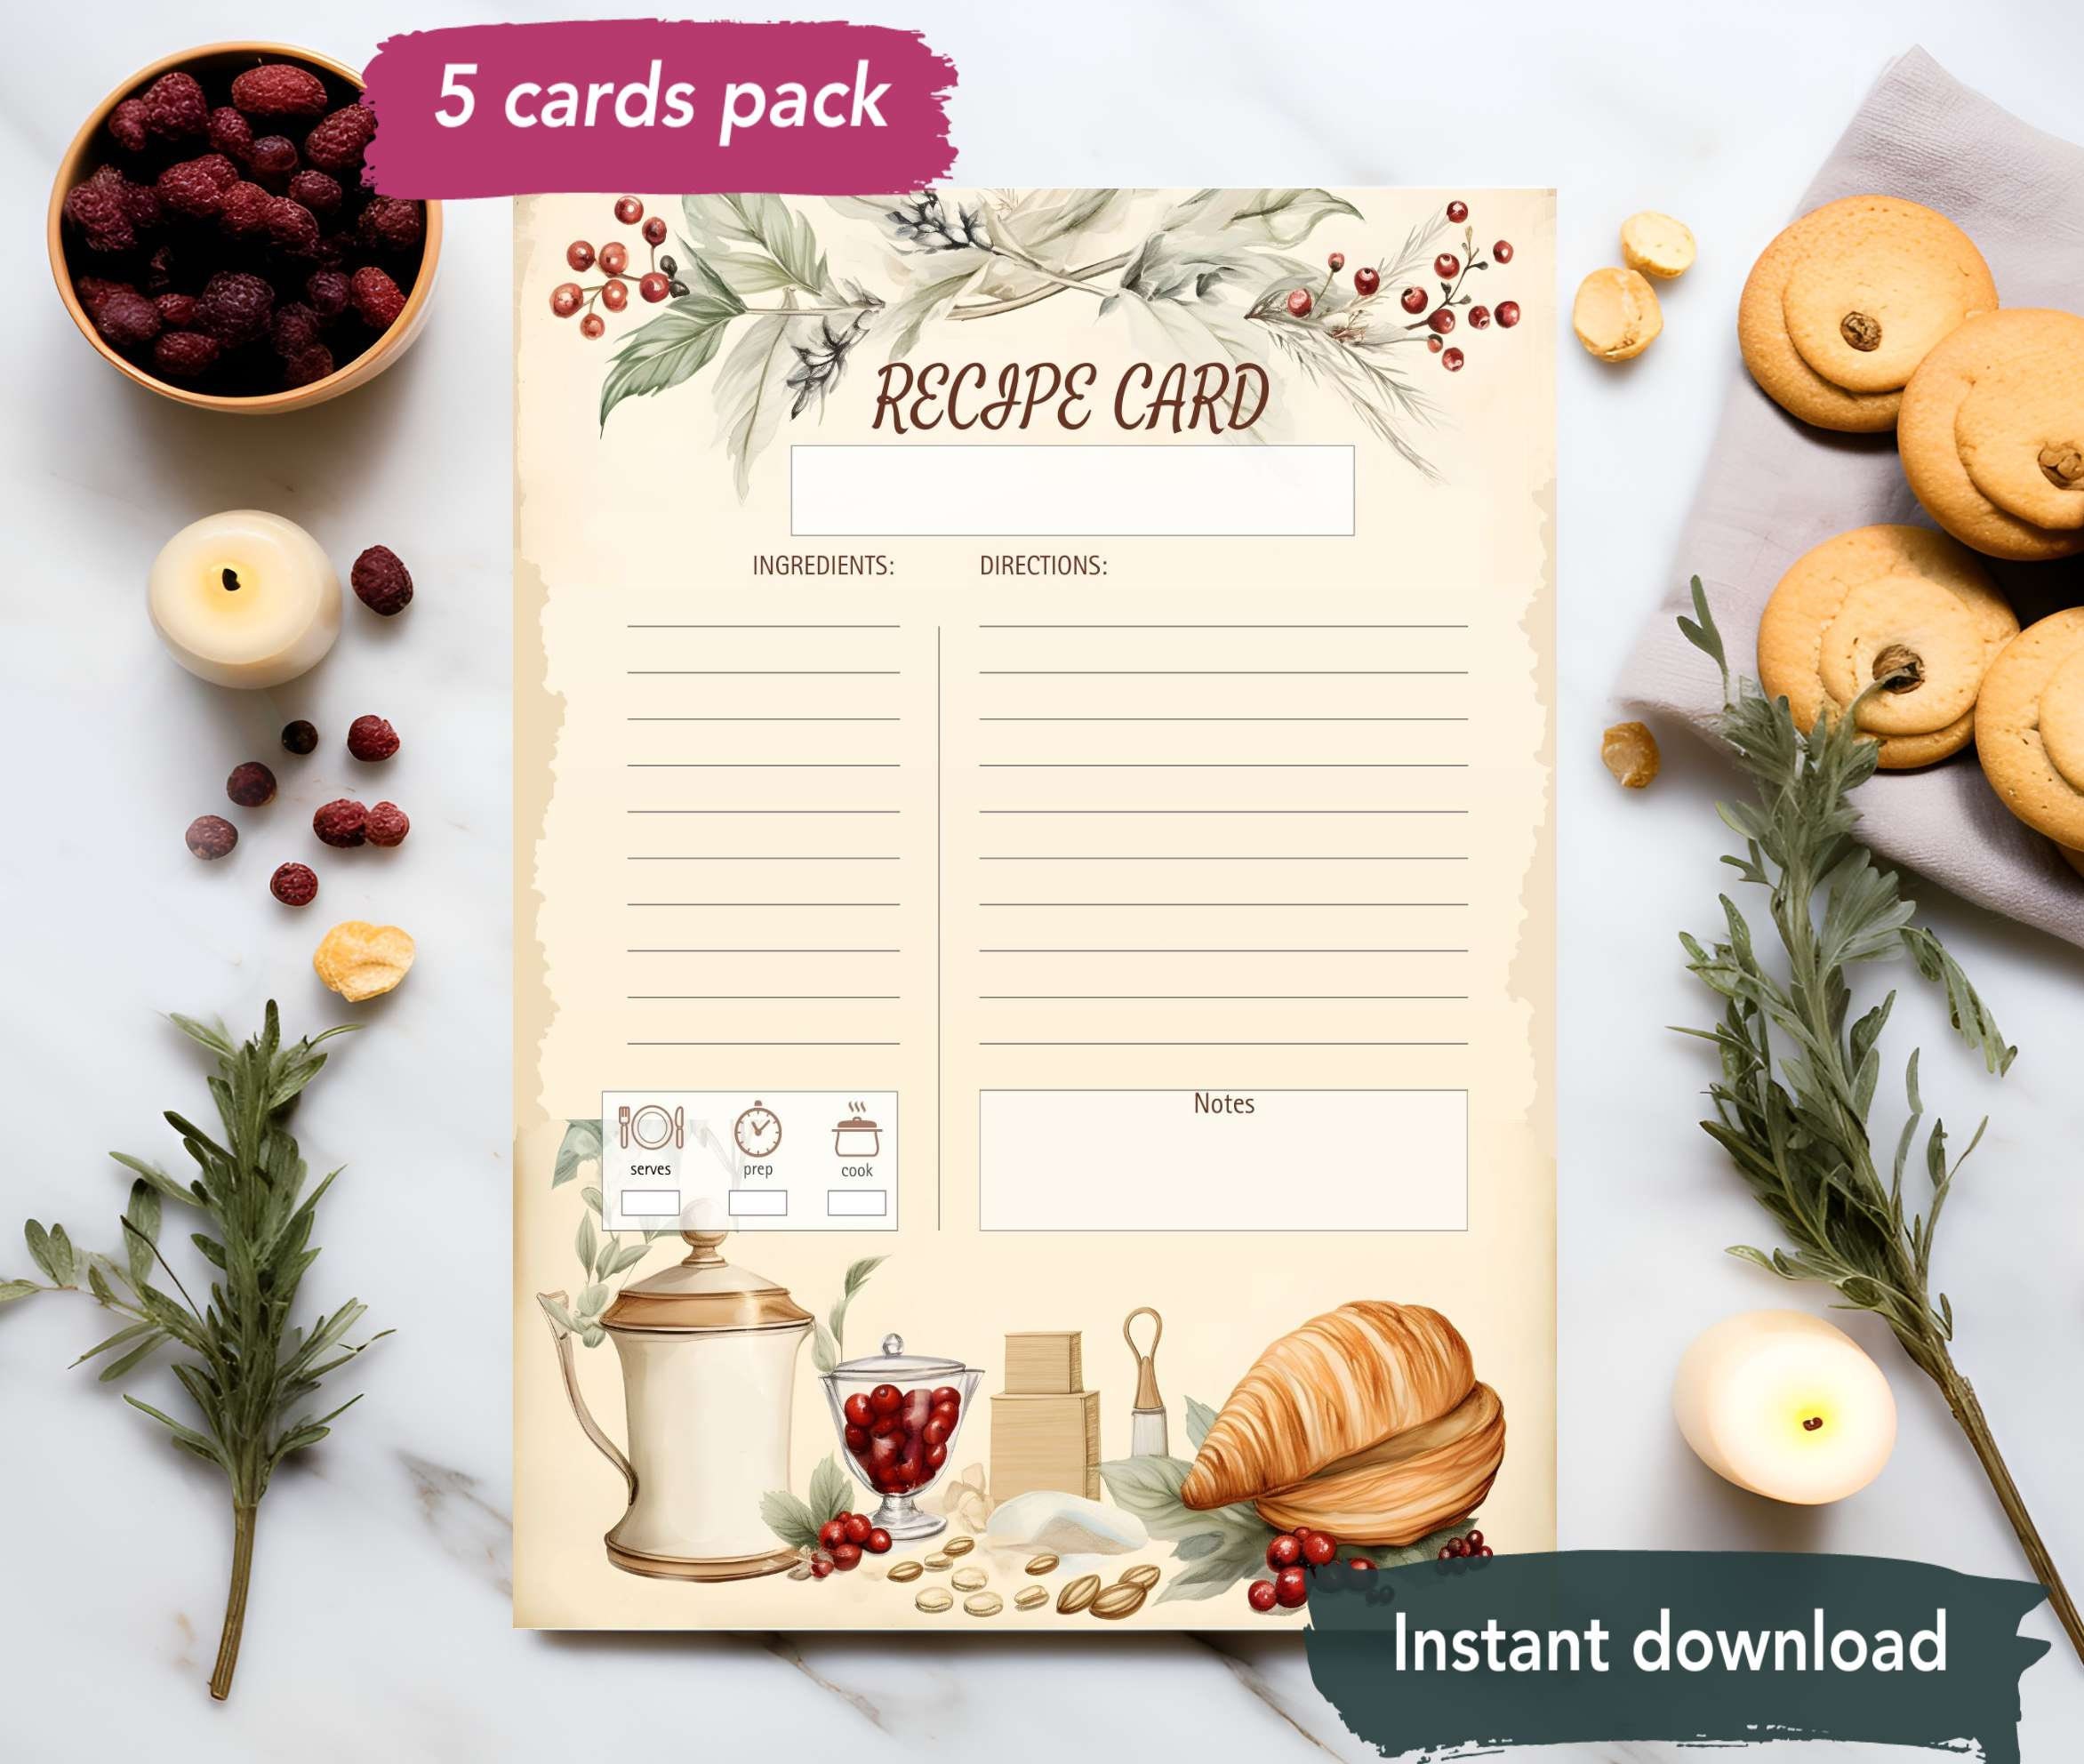 4 X 6 Recipe Cards, Front per Image and Backside is Lined